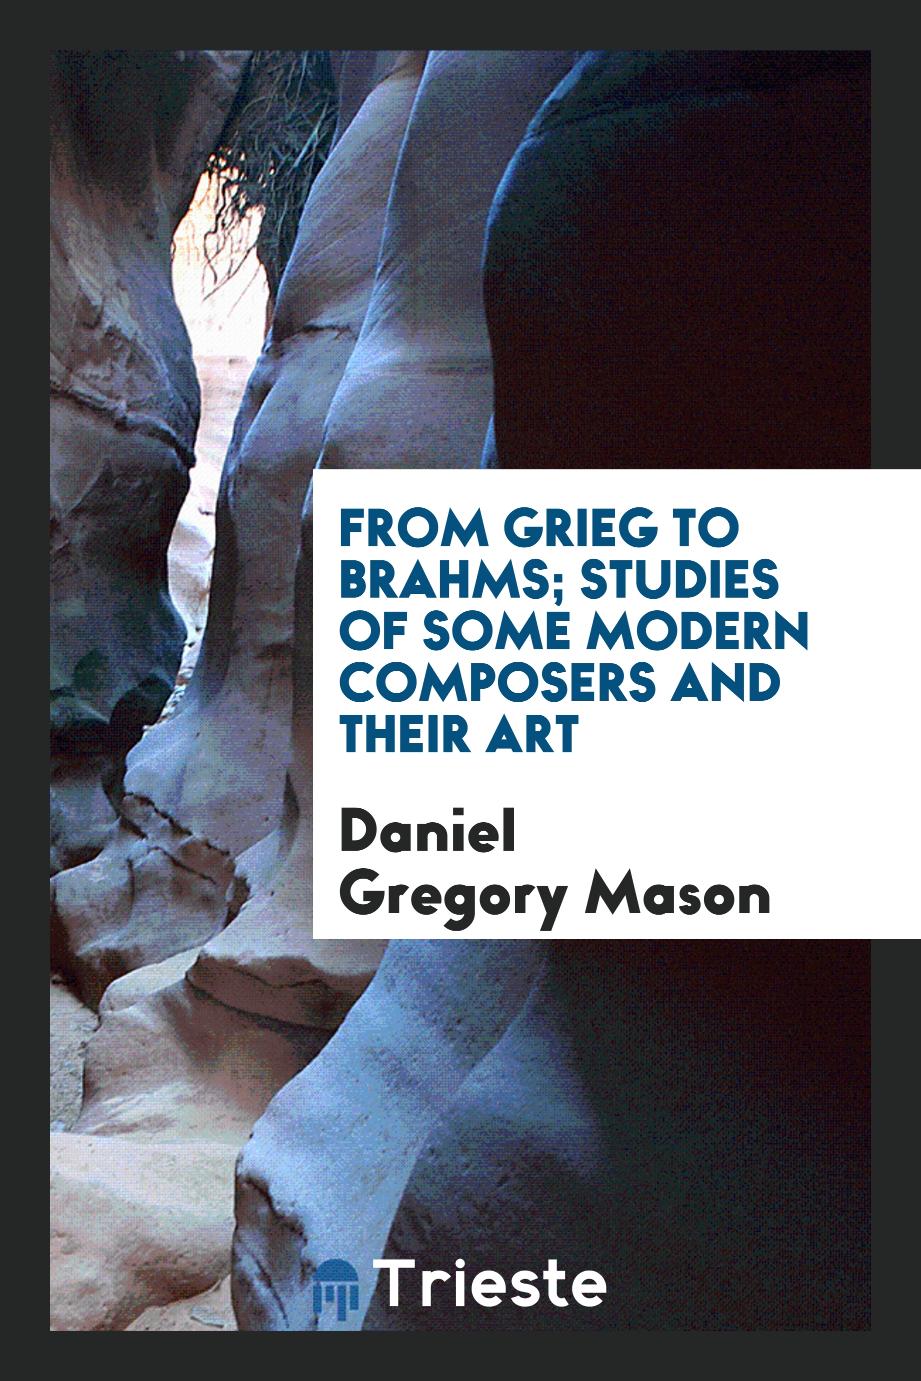 From Grieg to Brahms; studies of some modern composers and their art